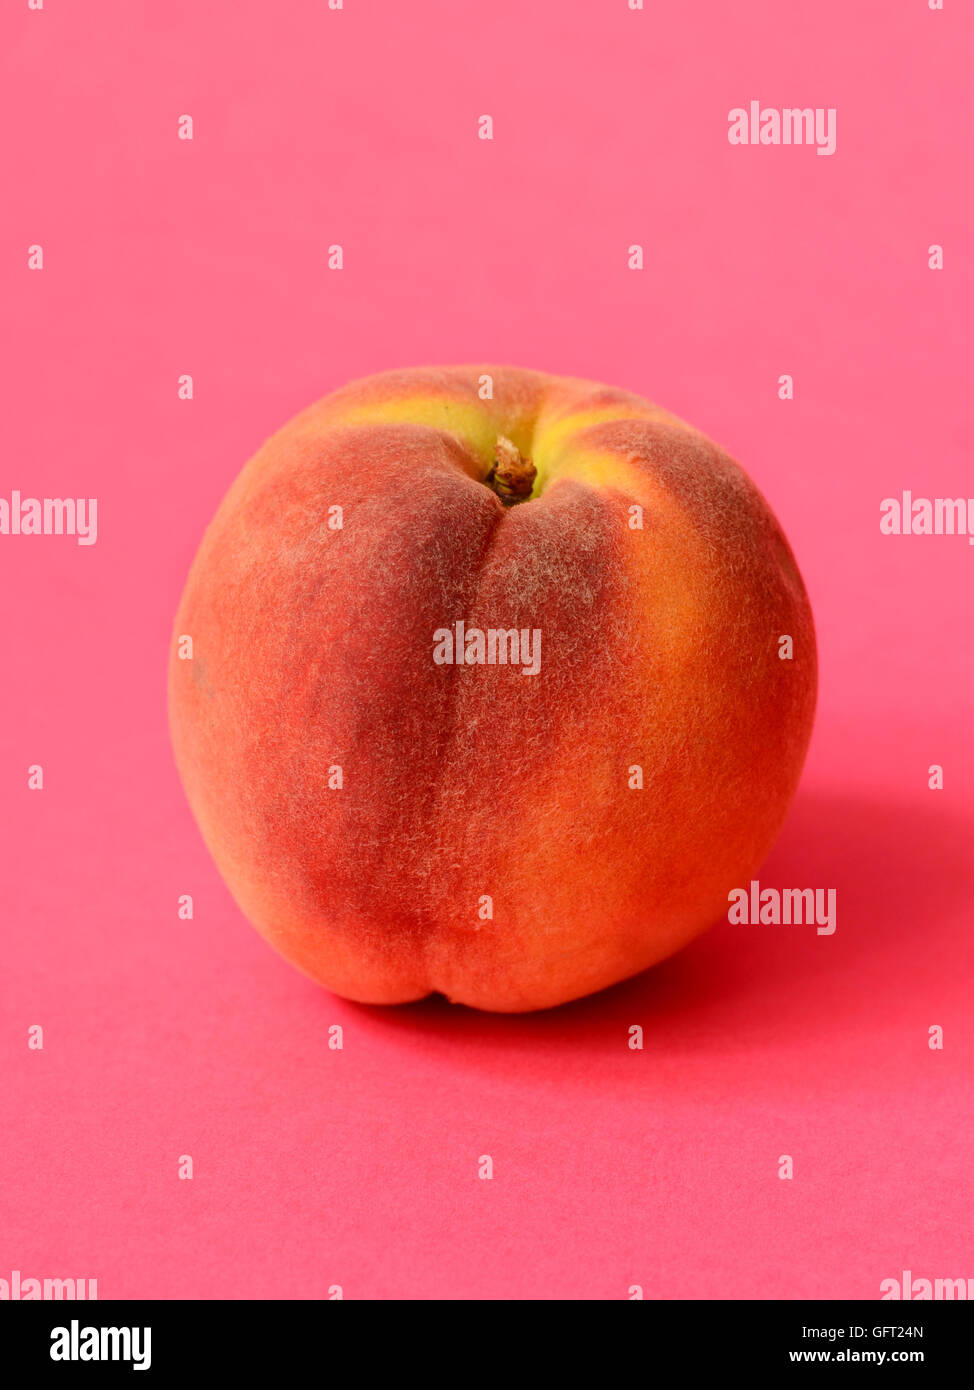 One ripe peach on a pink background Stock Photo